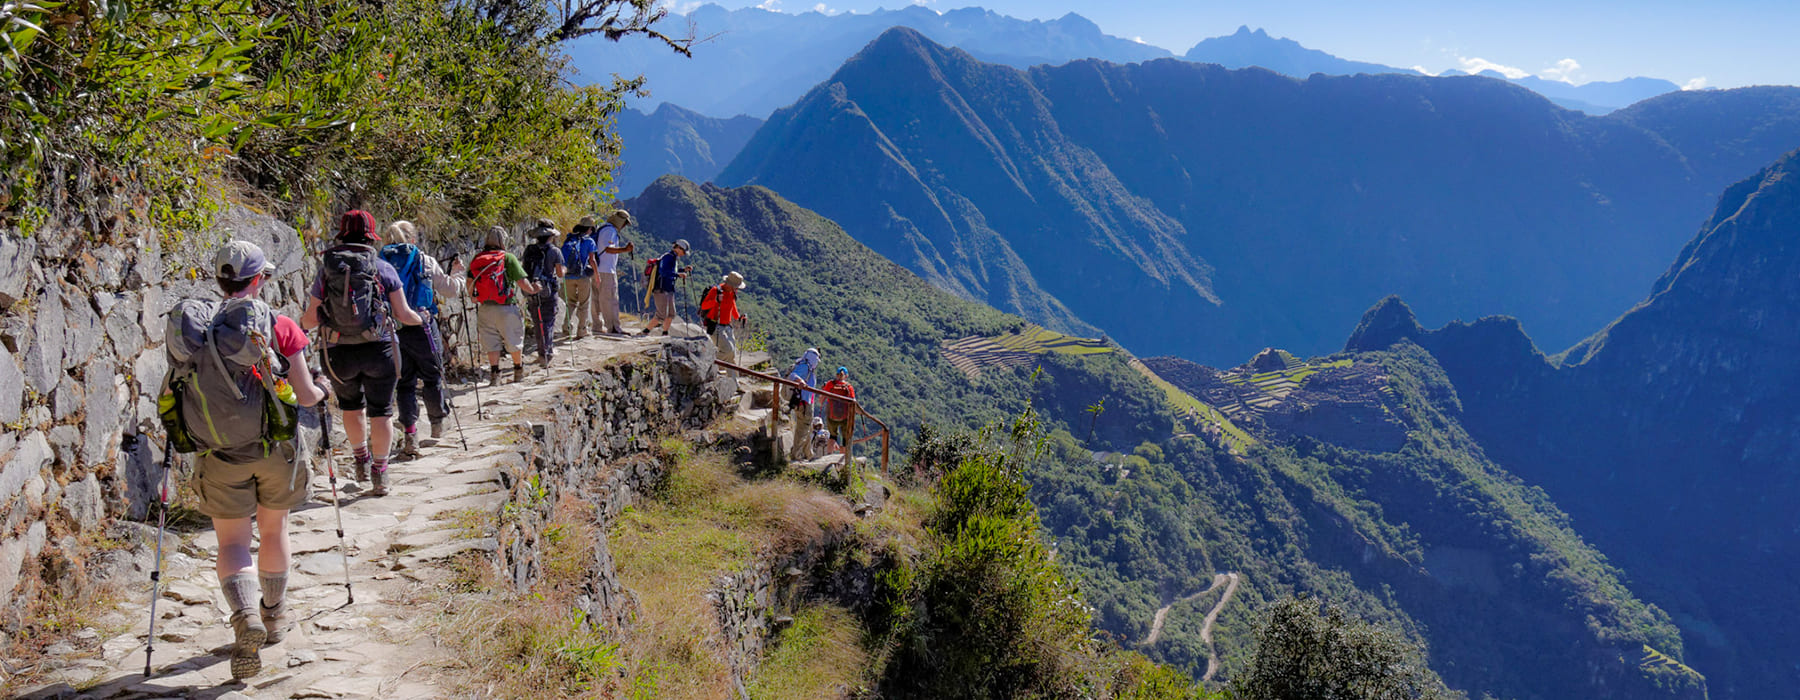 INCA TRAIL TO MACHU PICCHU: EVERYTHING YOU NEED TO KNOW